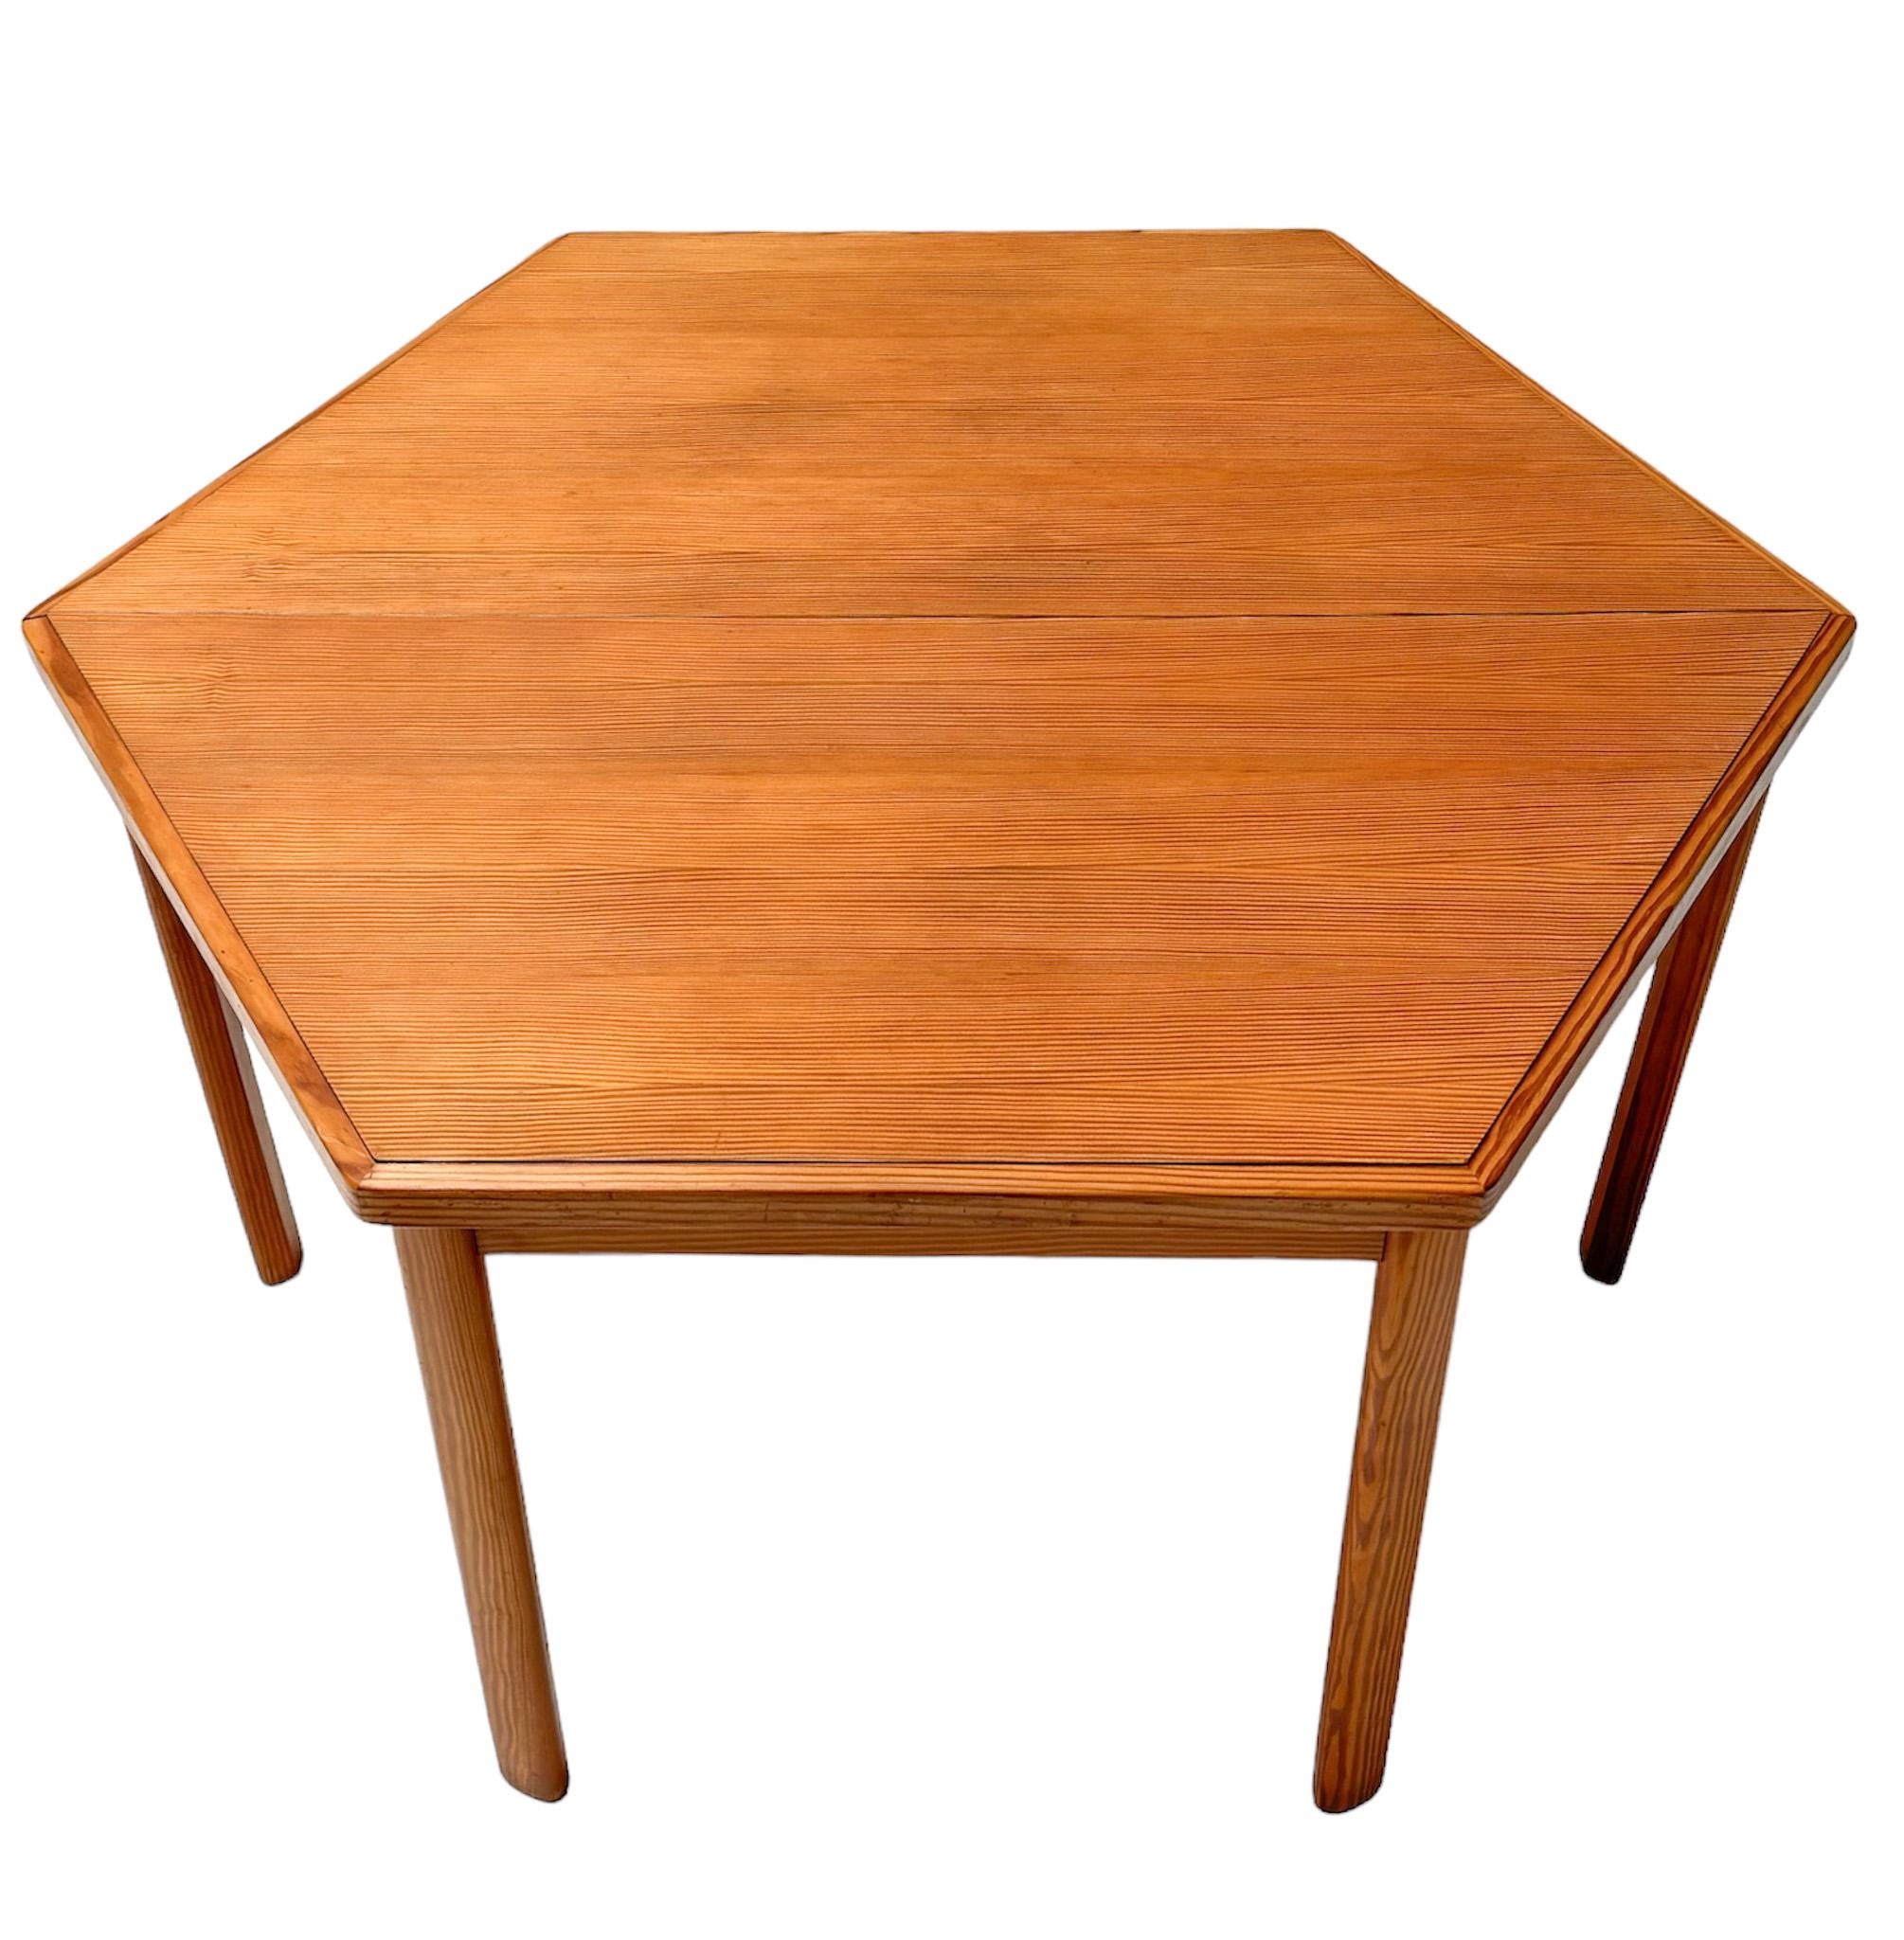 French Pine Mid-Century Modern Extendable Dining Room Table, 1970s For Sale 6